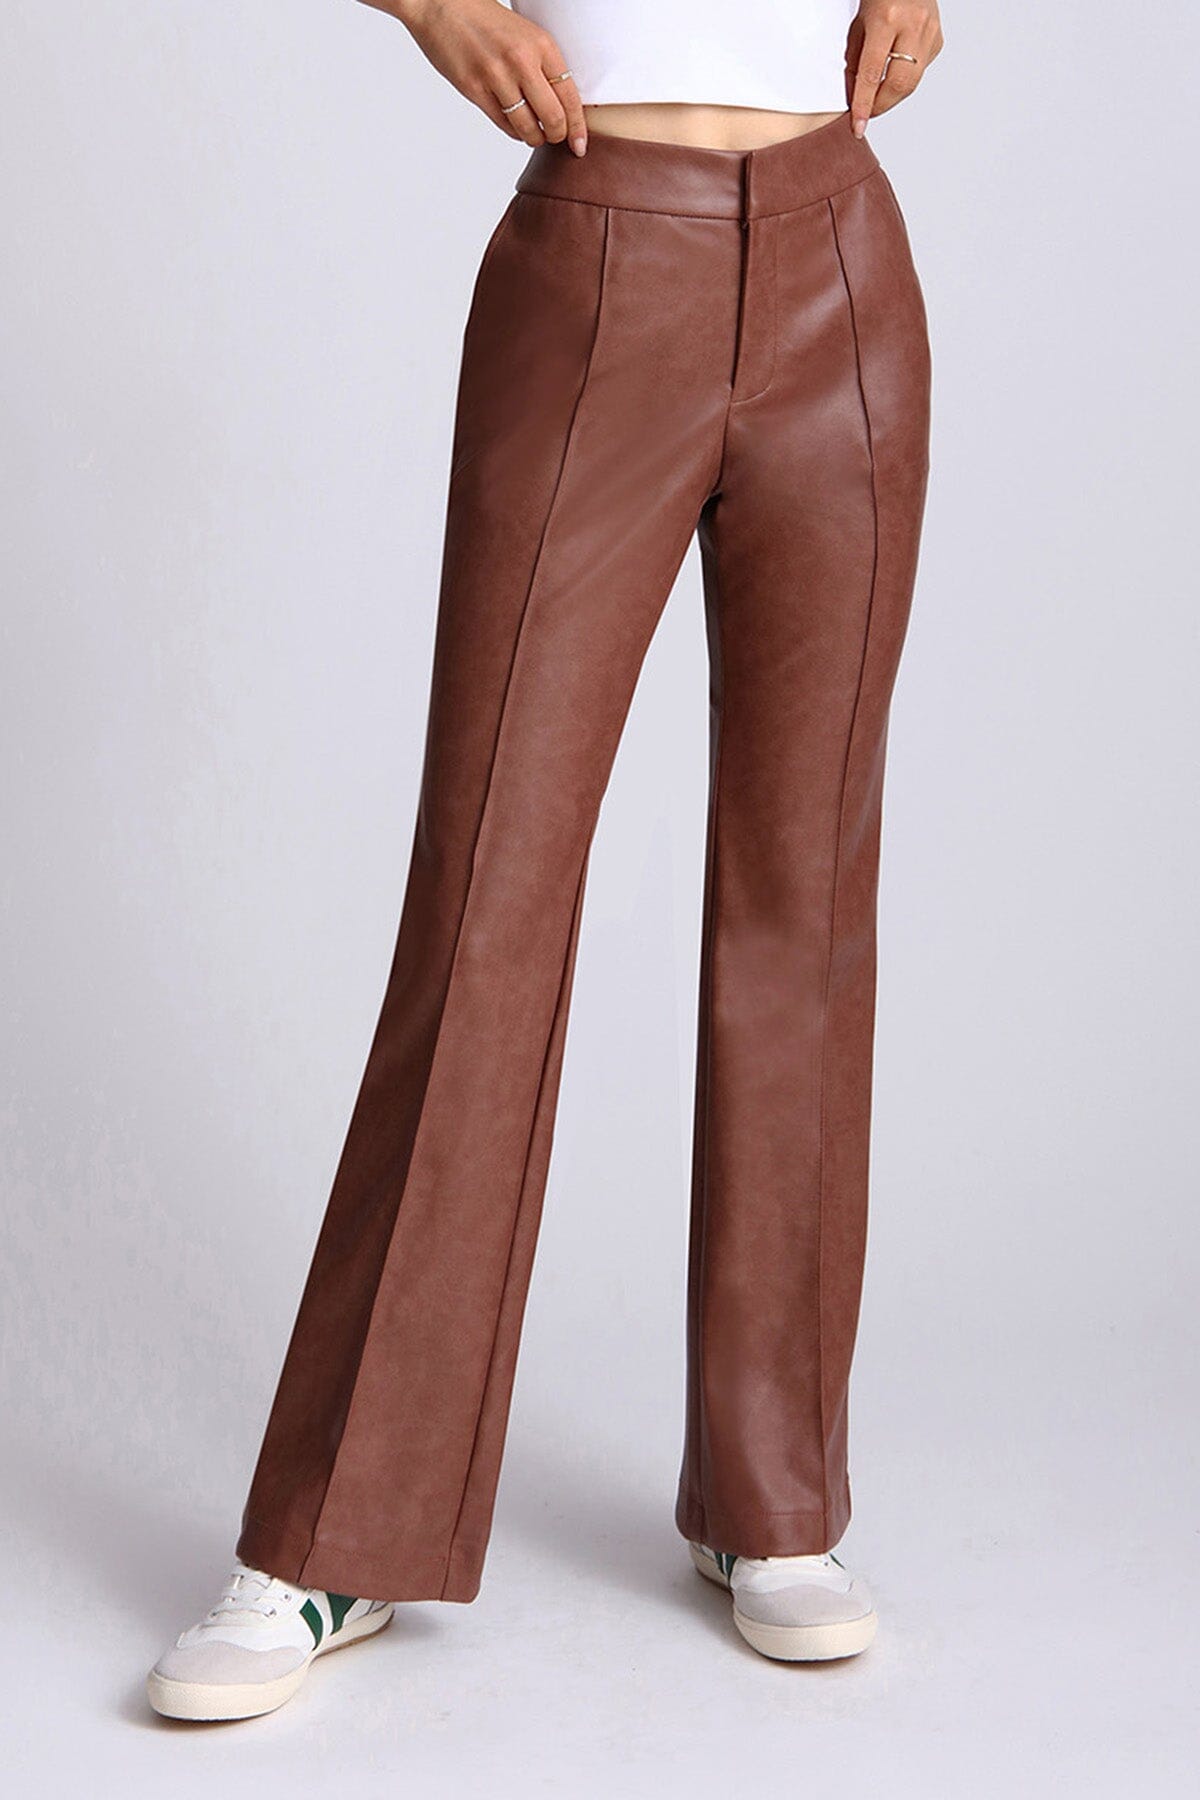 Brown faux leather high waisted flare leg trouser pants by Avec Les Filles